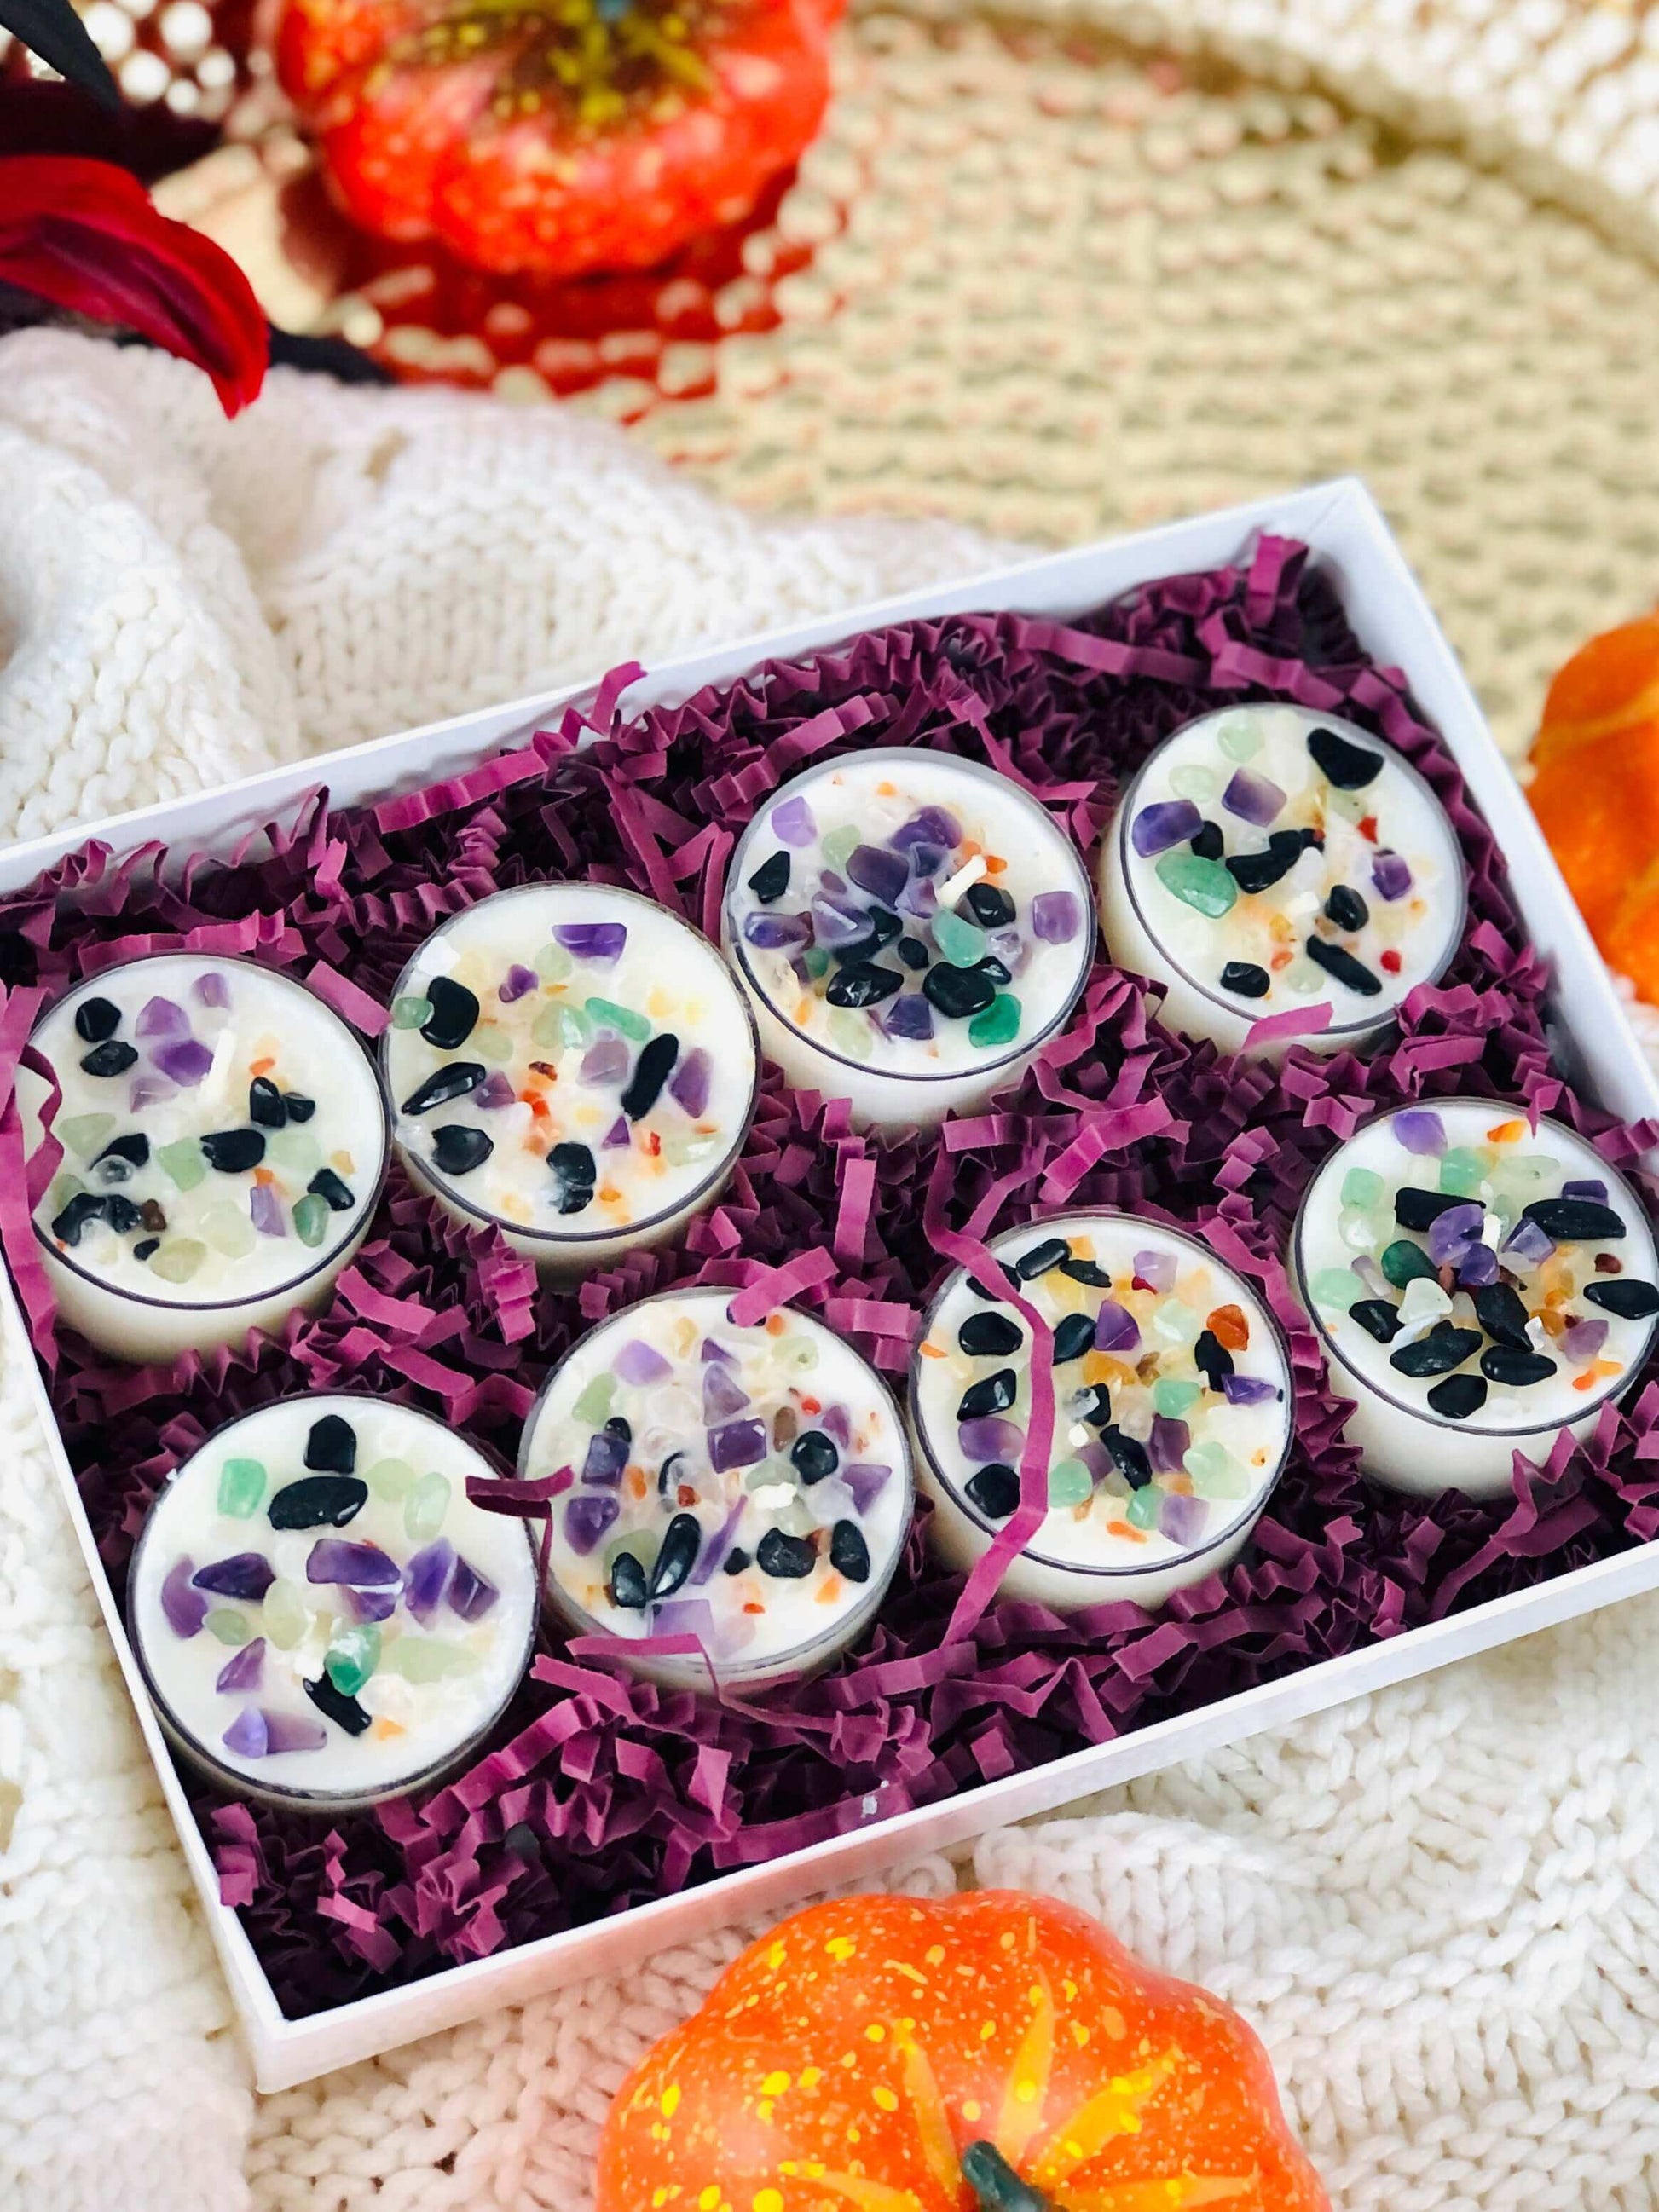 NEW - Witches Brew fall holidays tea lights candles